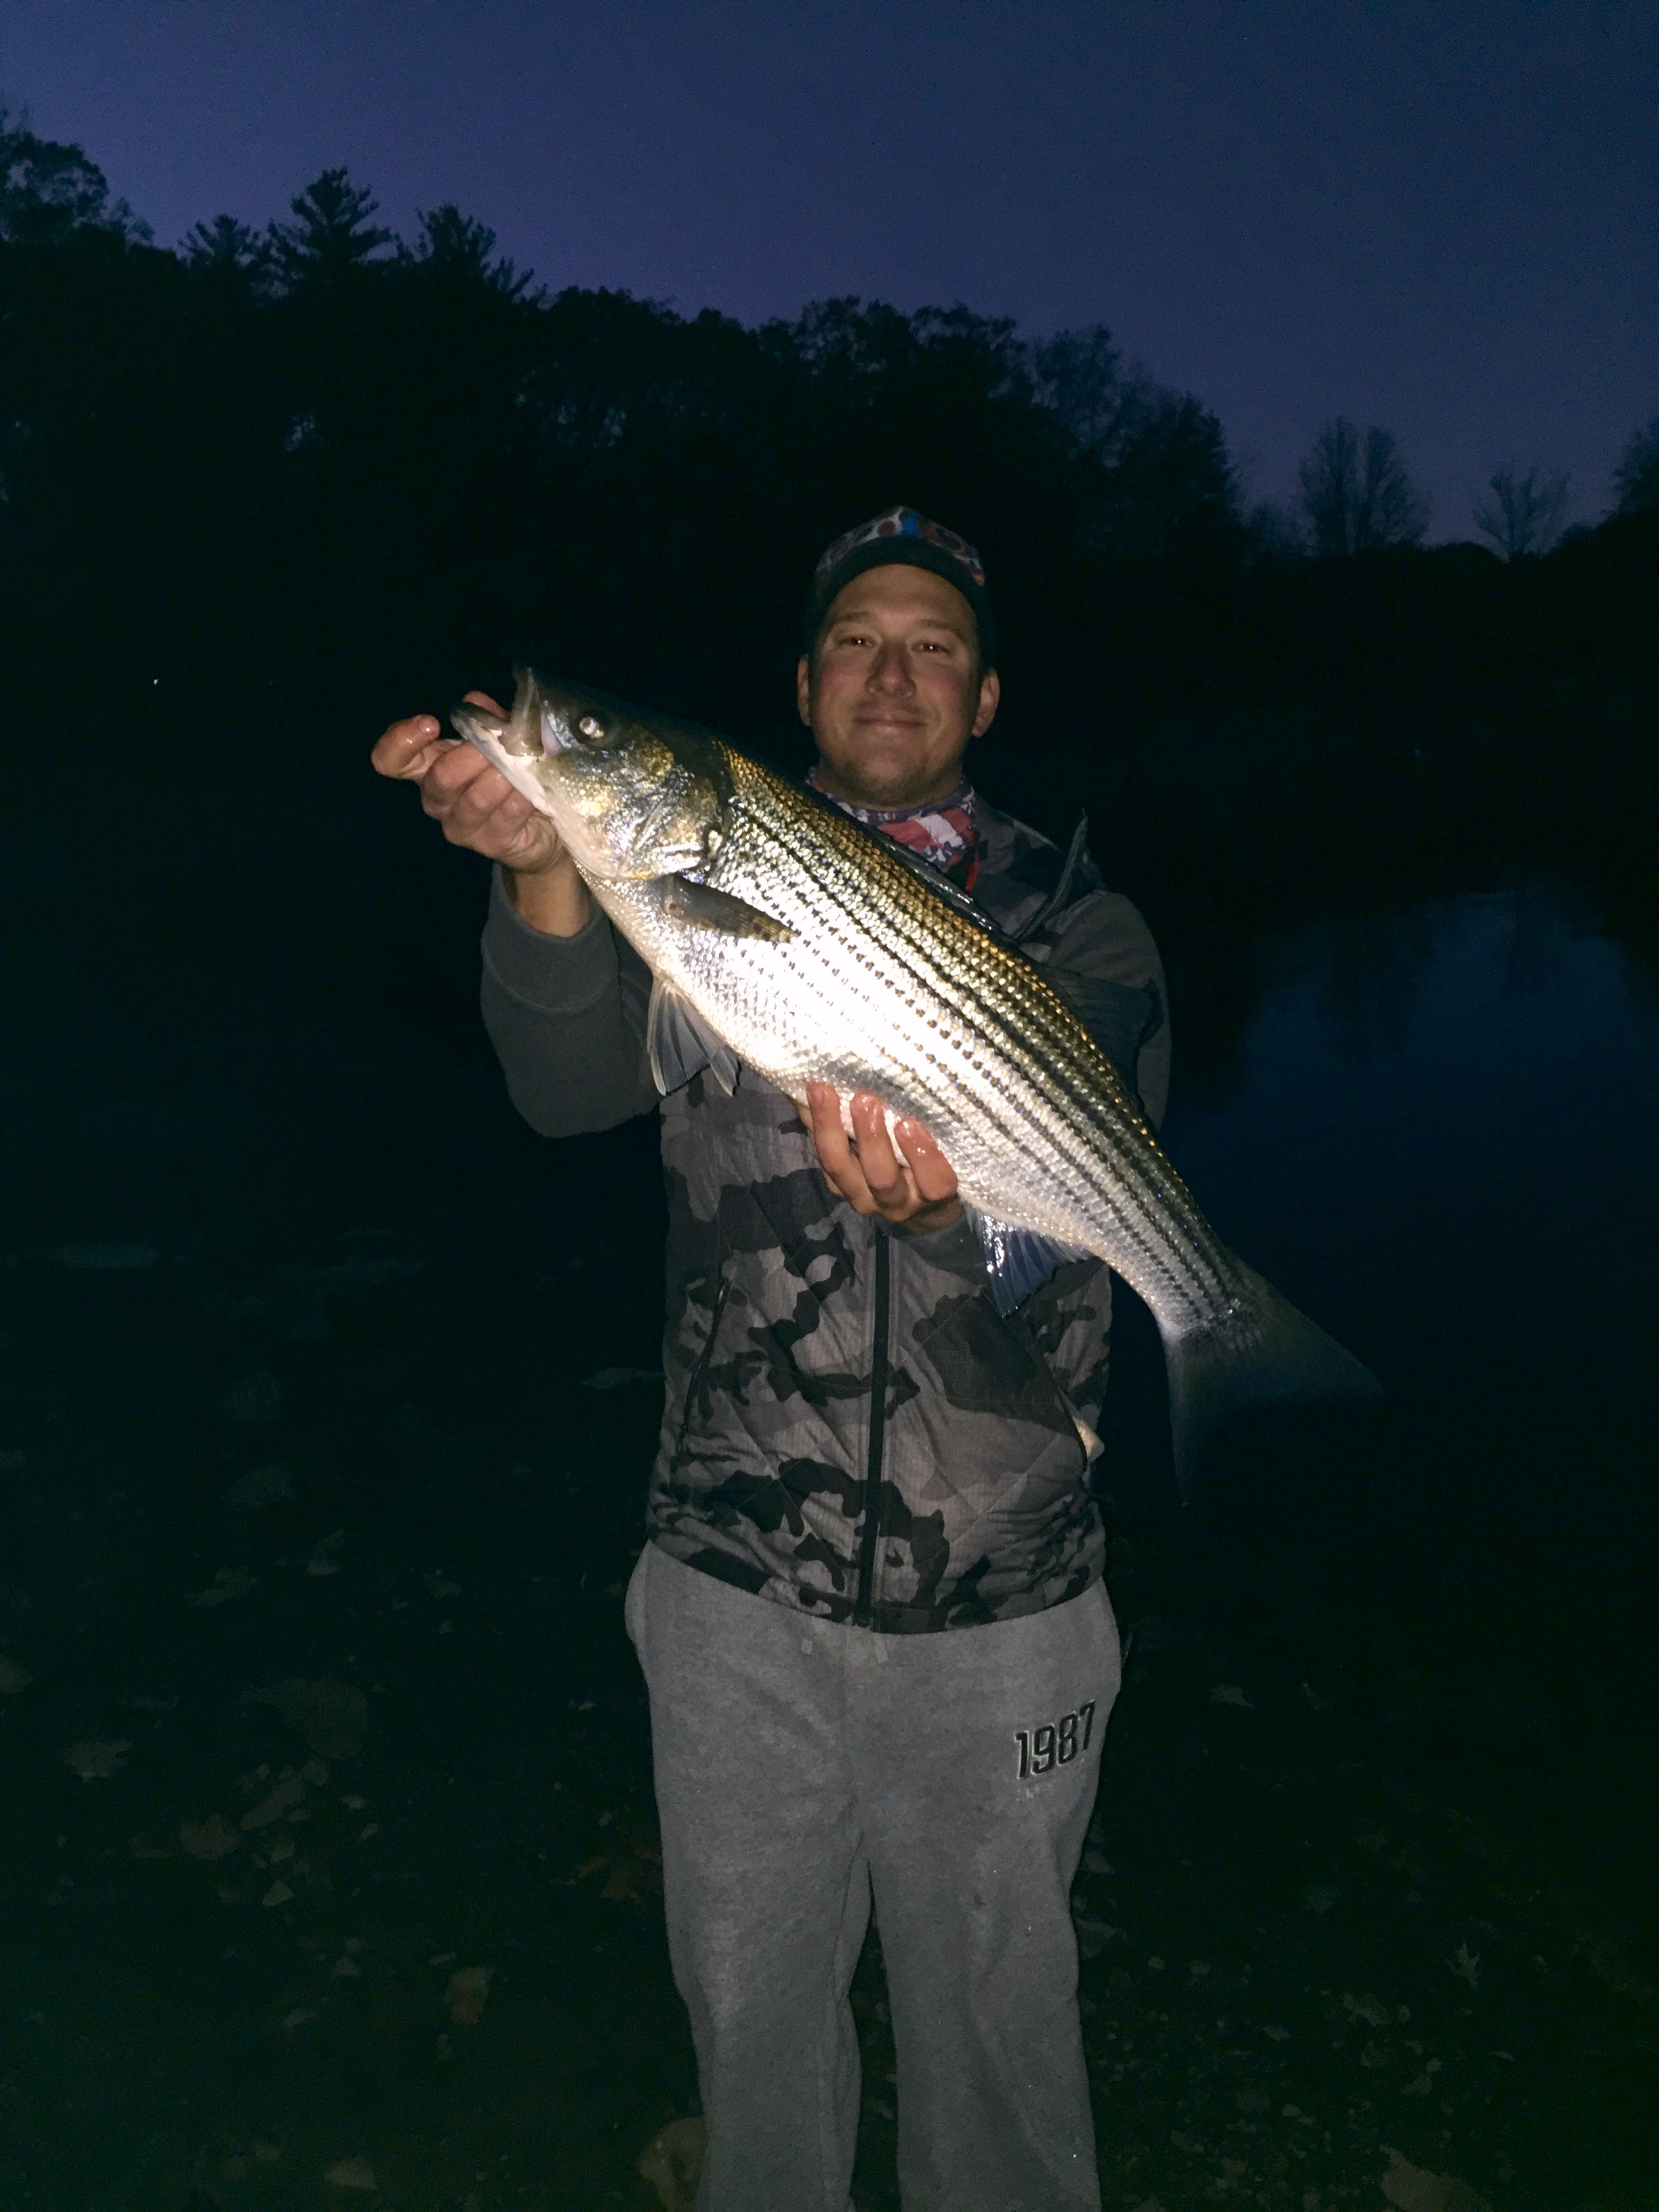 Lake wallenpaupack striper ! - Other Fish Species - Bass Fishing Forums